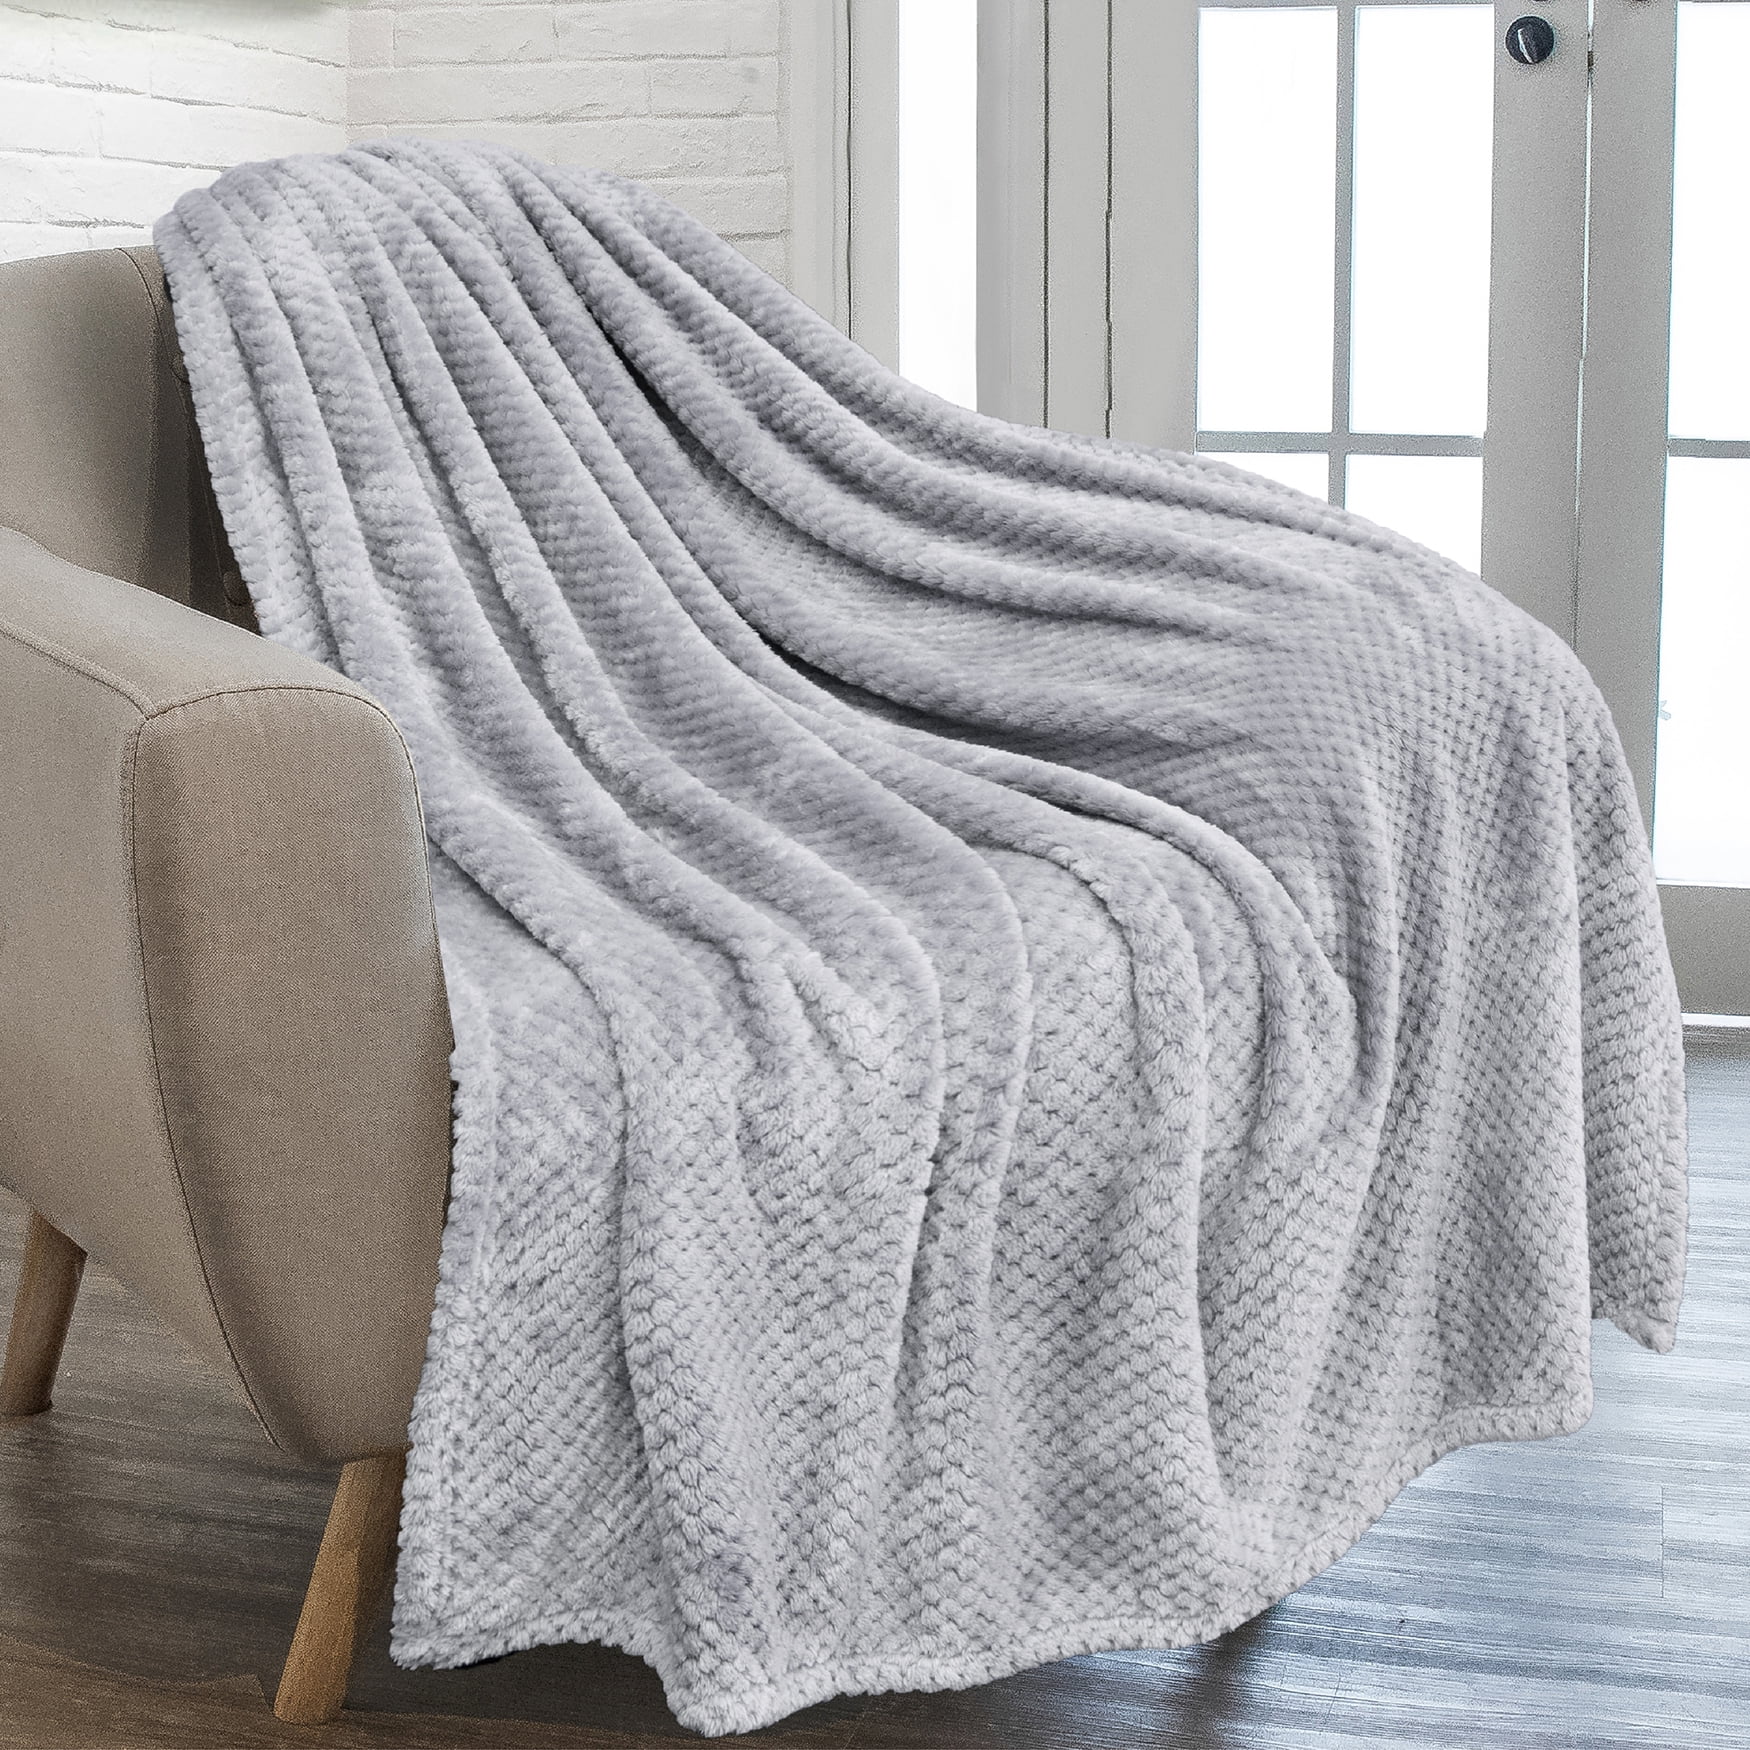 Warm Fuzzy Plush Throw 50x 80 Fleece Throw Blanket Full Size Beach Wood Stripes Grain of Blue and Brown Color Lightweight Flannel Blankets for Couch Bed Living Room 